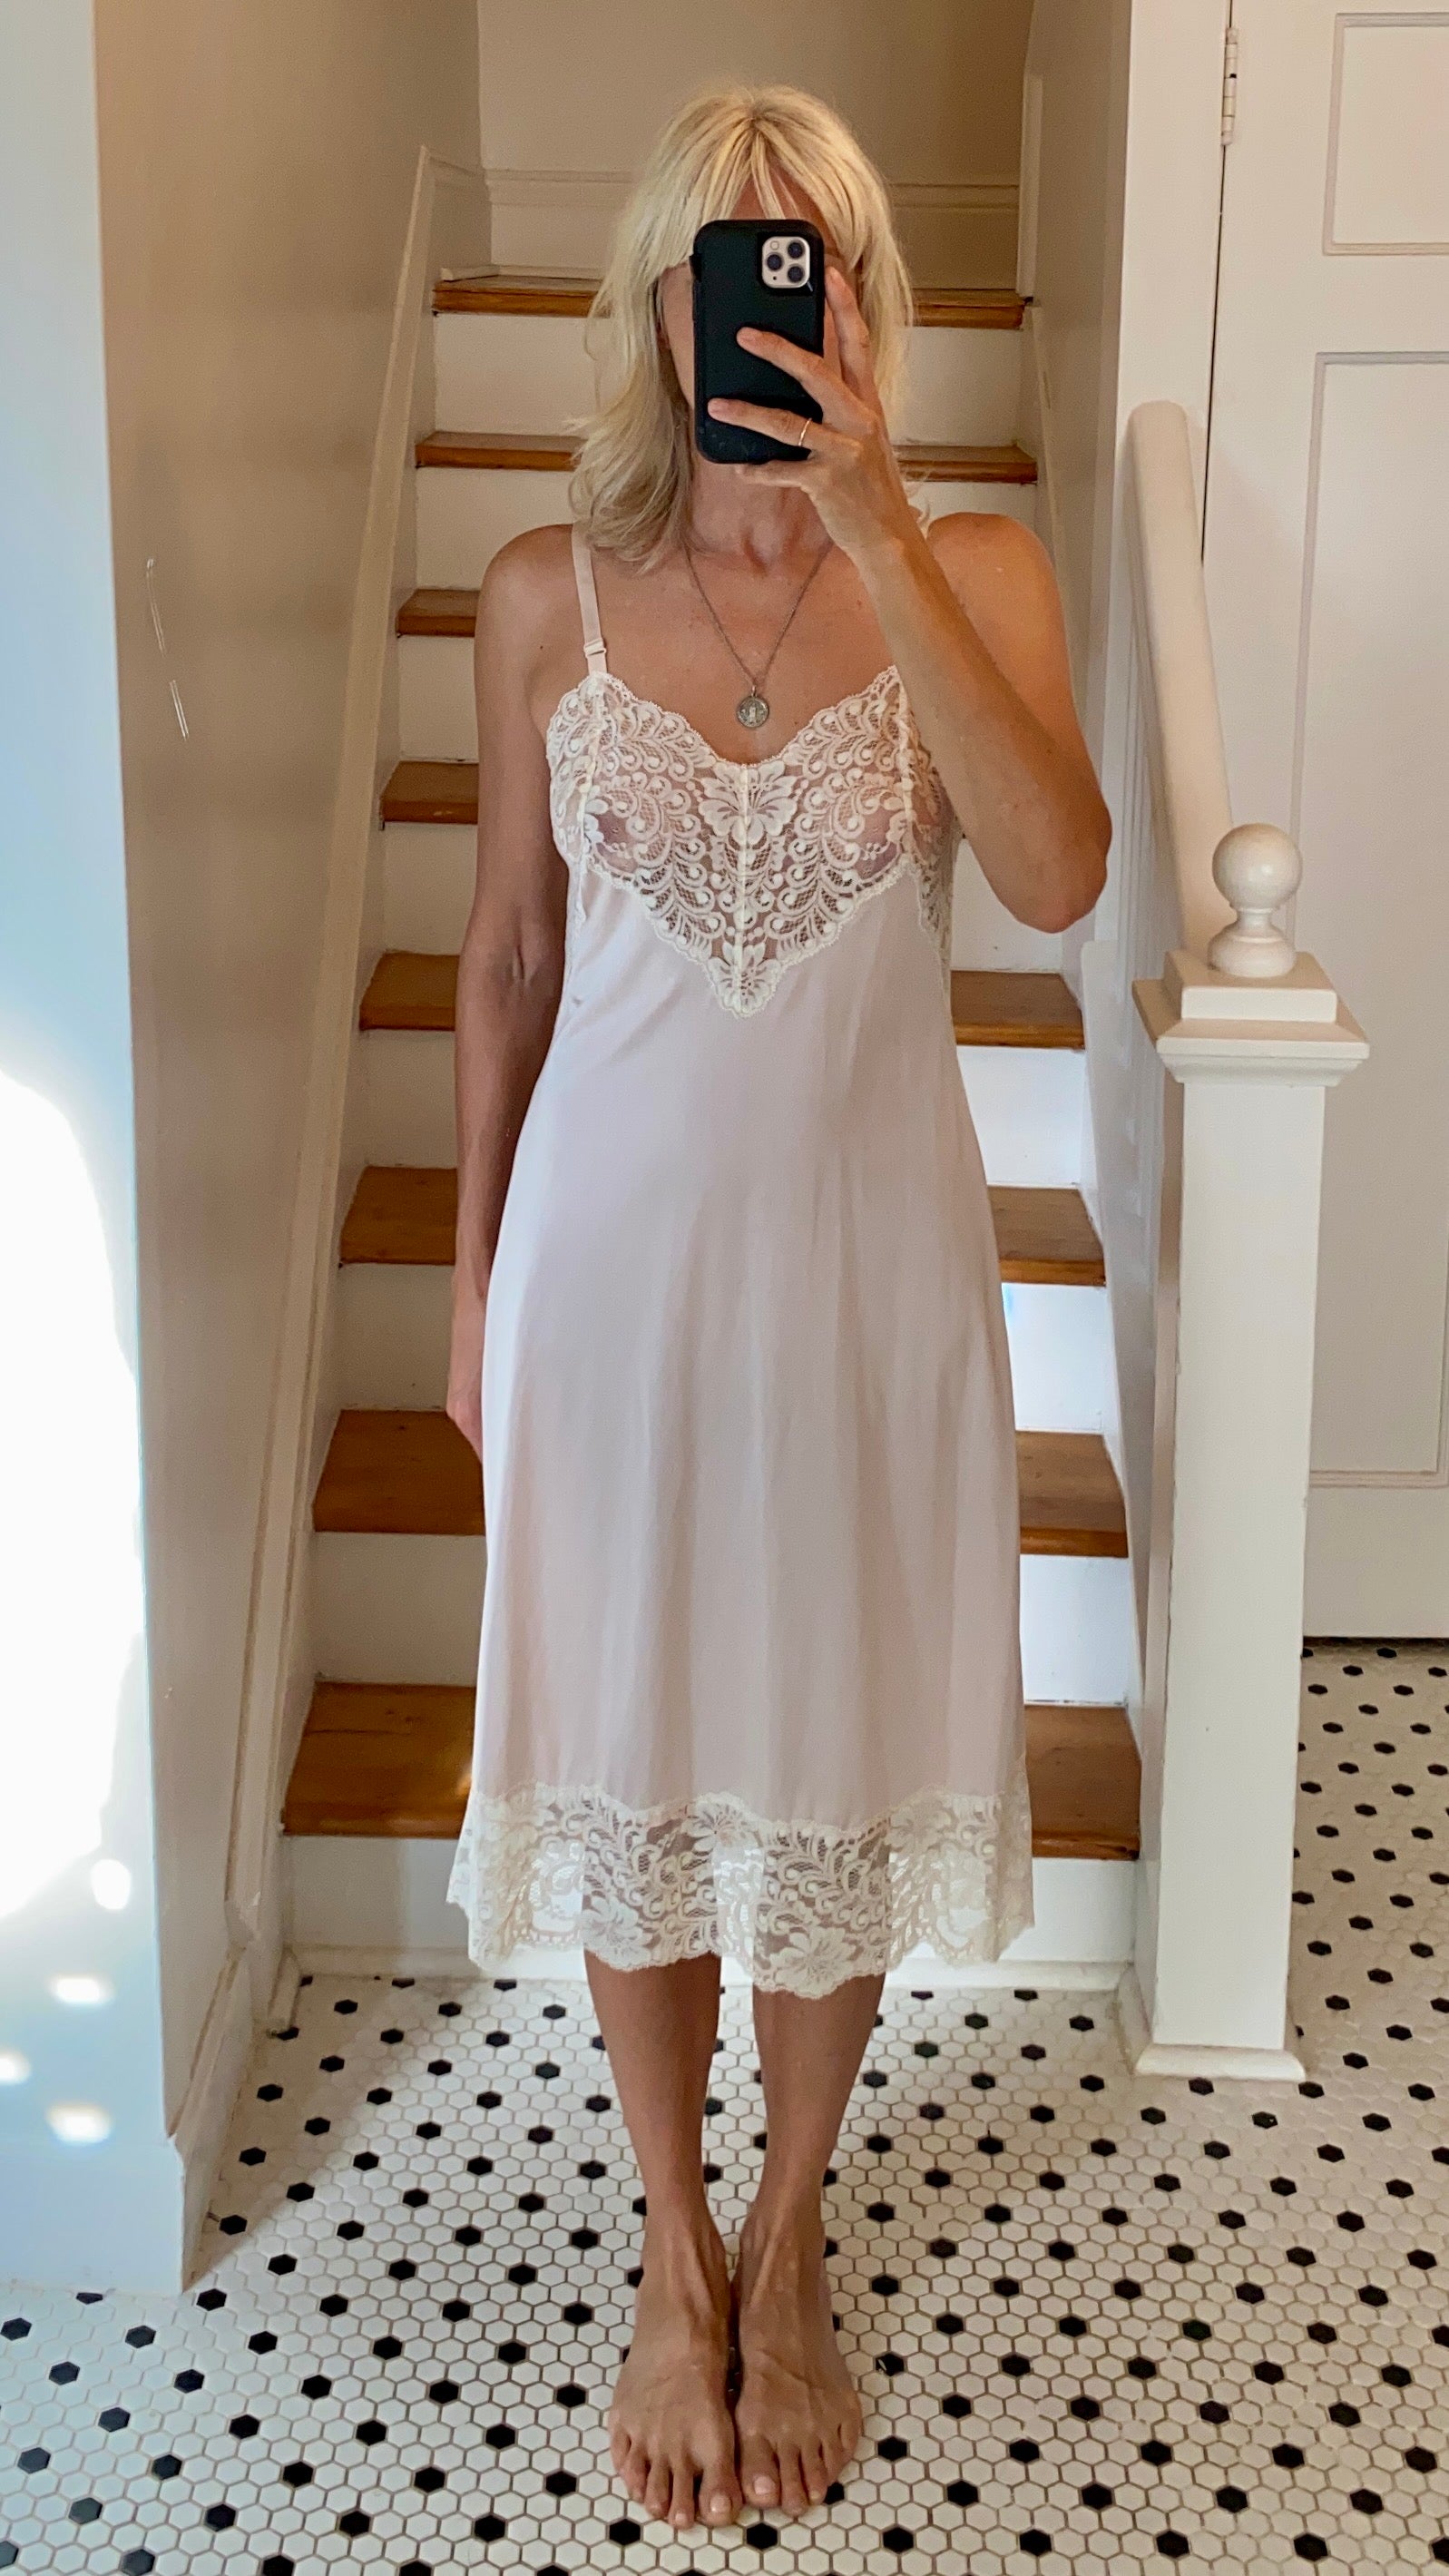 VINTAGE Pink and Cream Lace Slip Dress